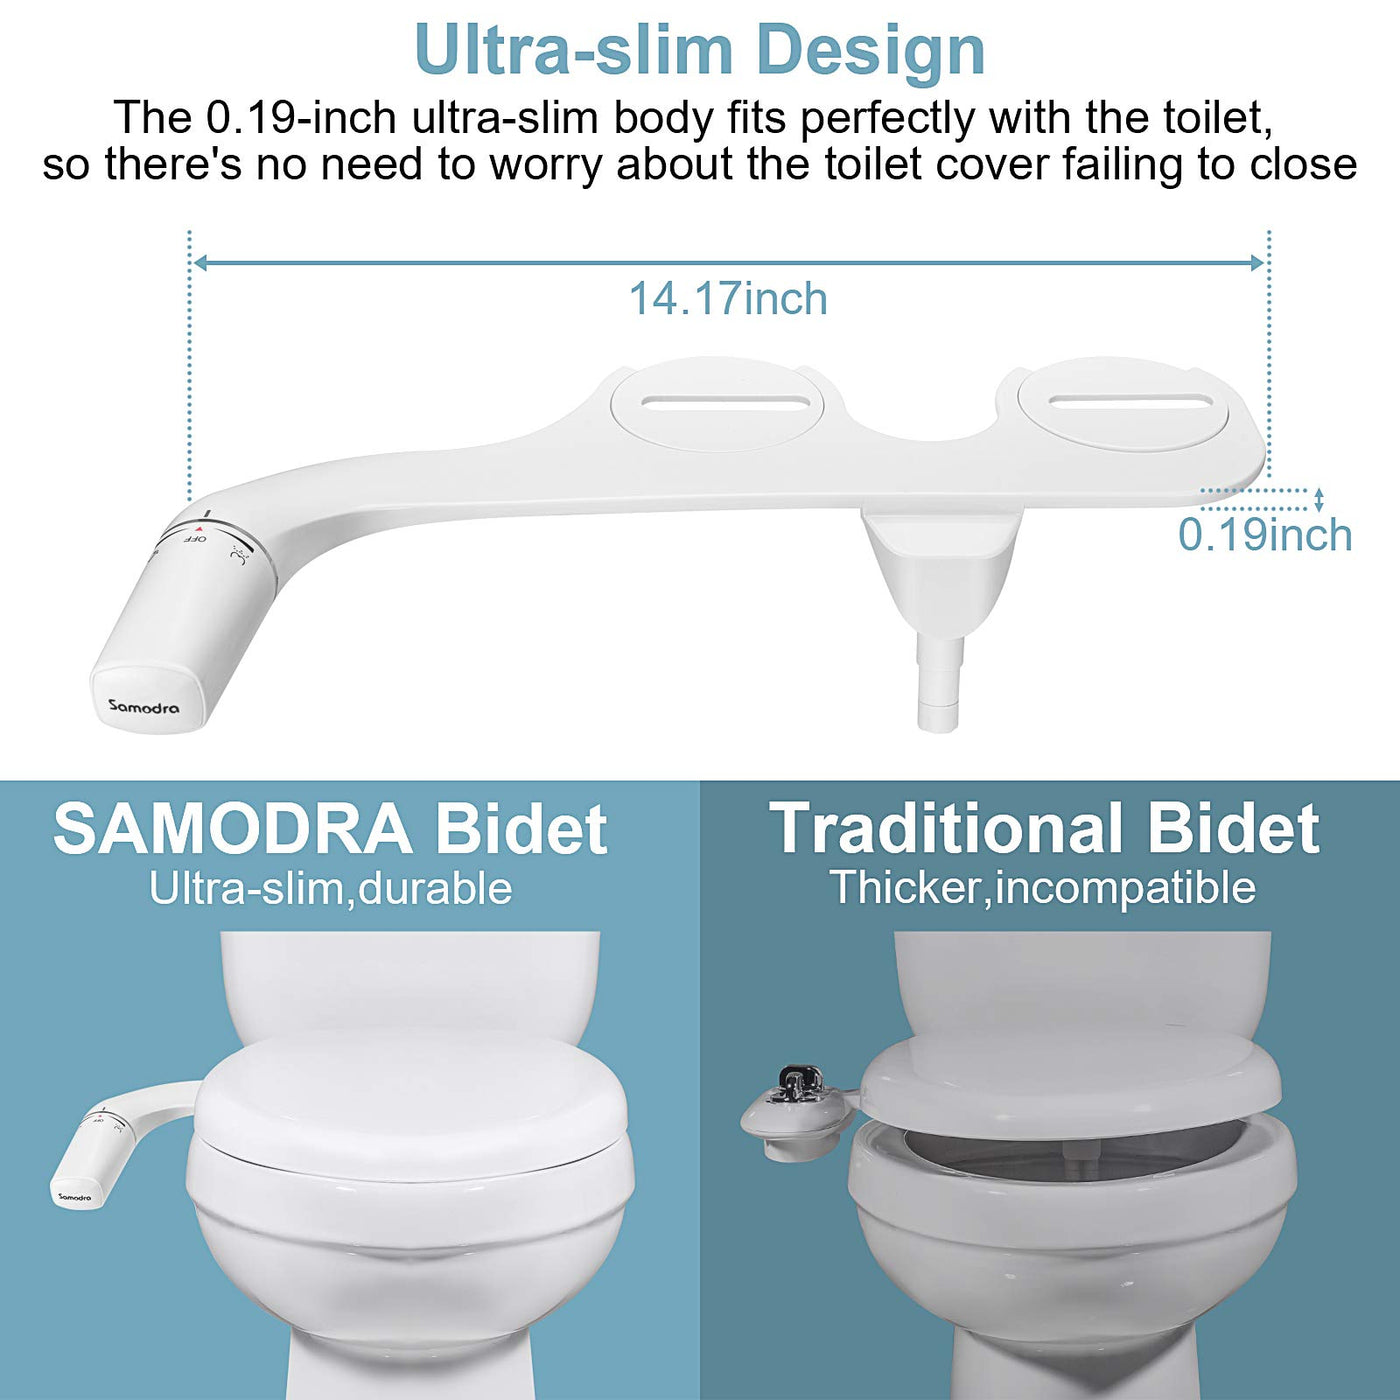 SAMODRA Self Cleaning Bidet for Toilet, Ultra-Slim Single Nozzle Bidet Attachment for Toilet with Adjustable Water Pressure, Fresh Water Non-Electric Bidet，Minimalist Bidet Ease of Use